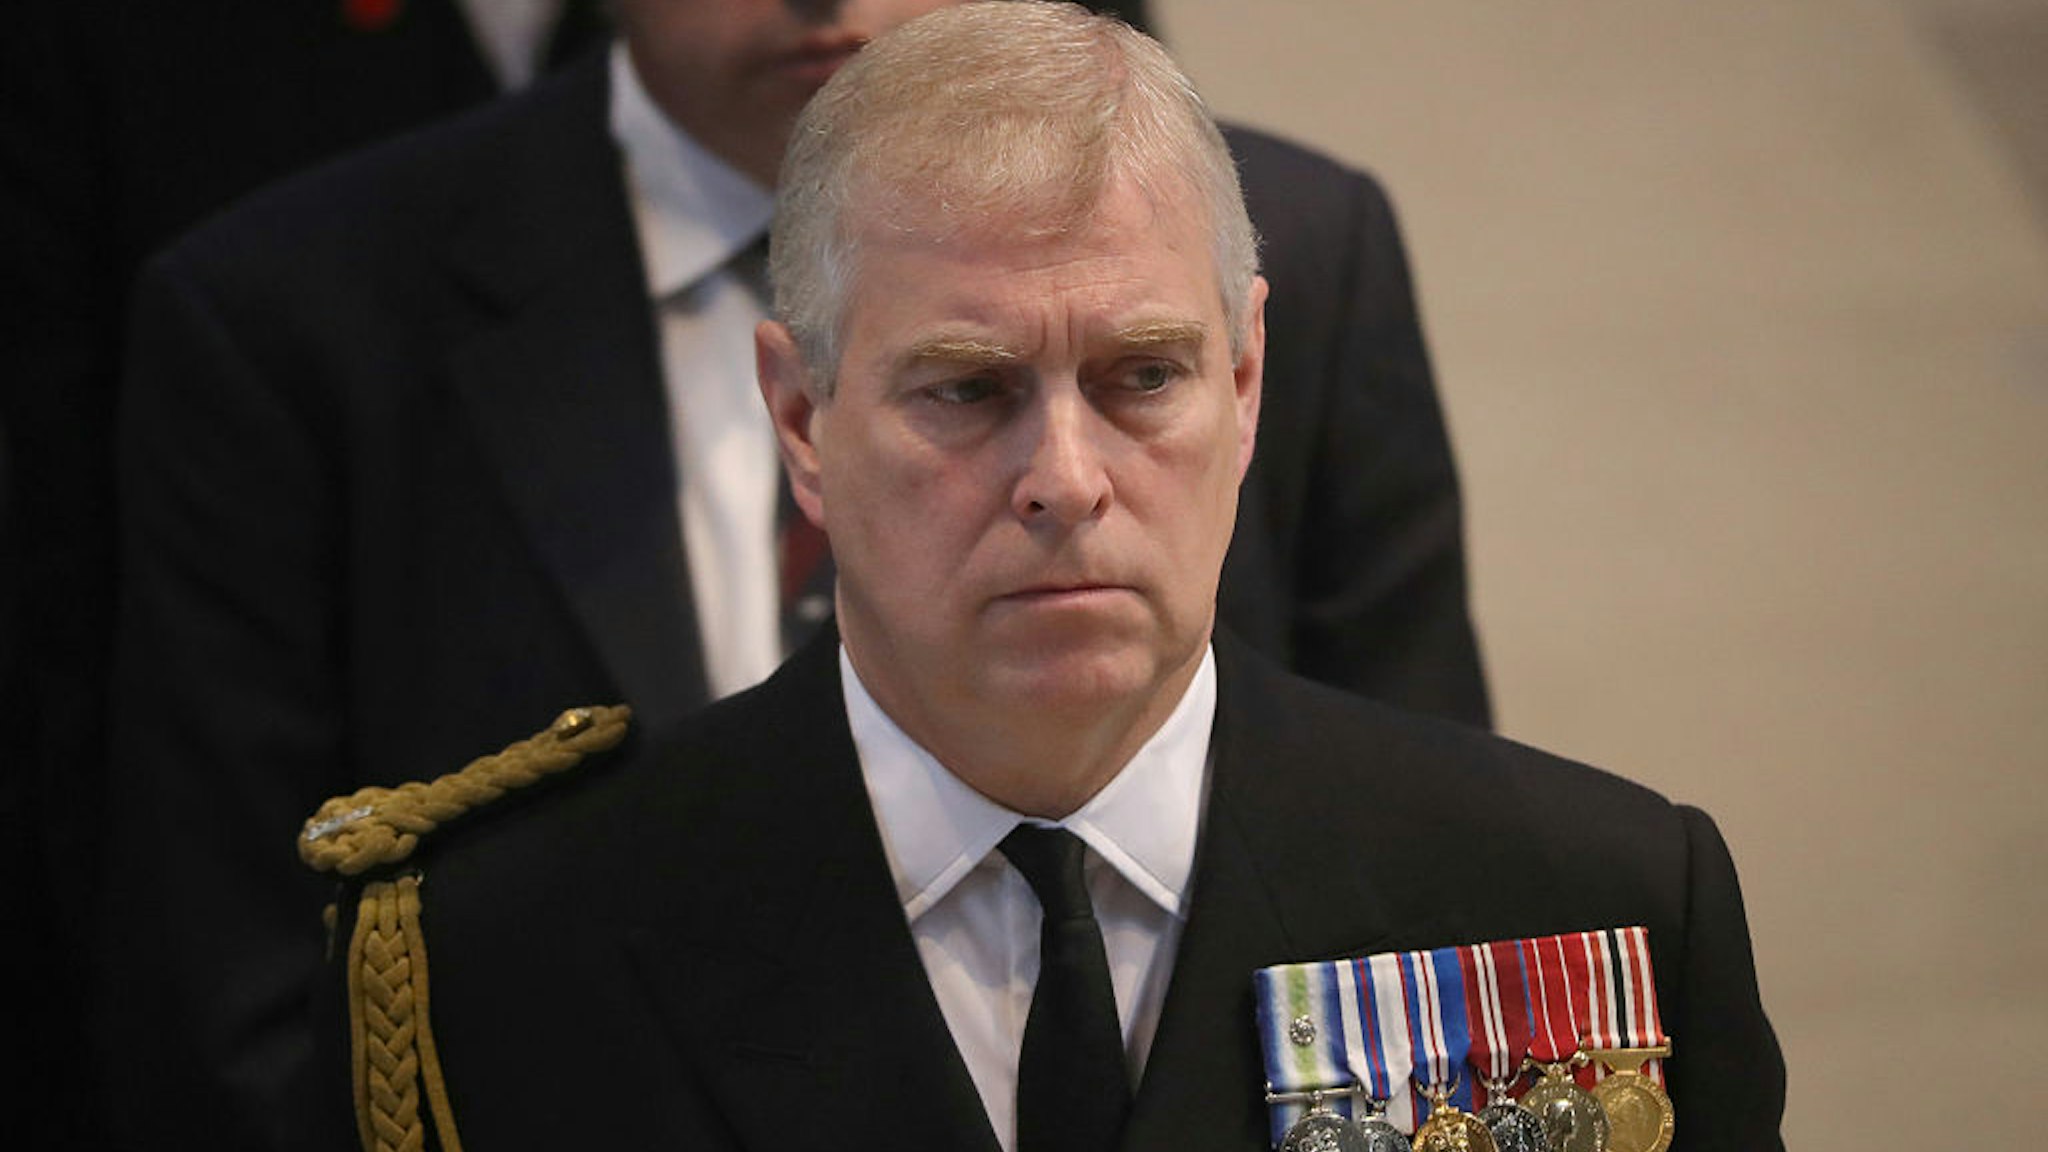 Prince Andrew, Duke of York, attends a commemoration service at Manchester Cathedral marking the 100th anniversary since the start of the Battle of the Somme. July 1, 2016 in Manchester, England.